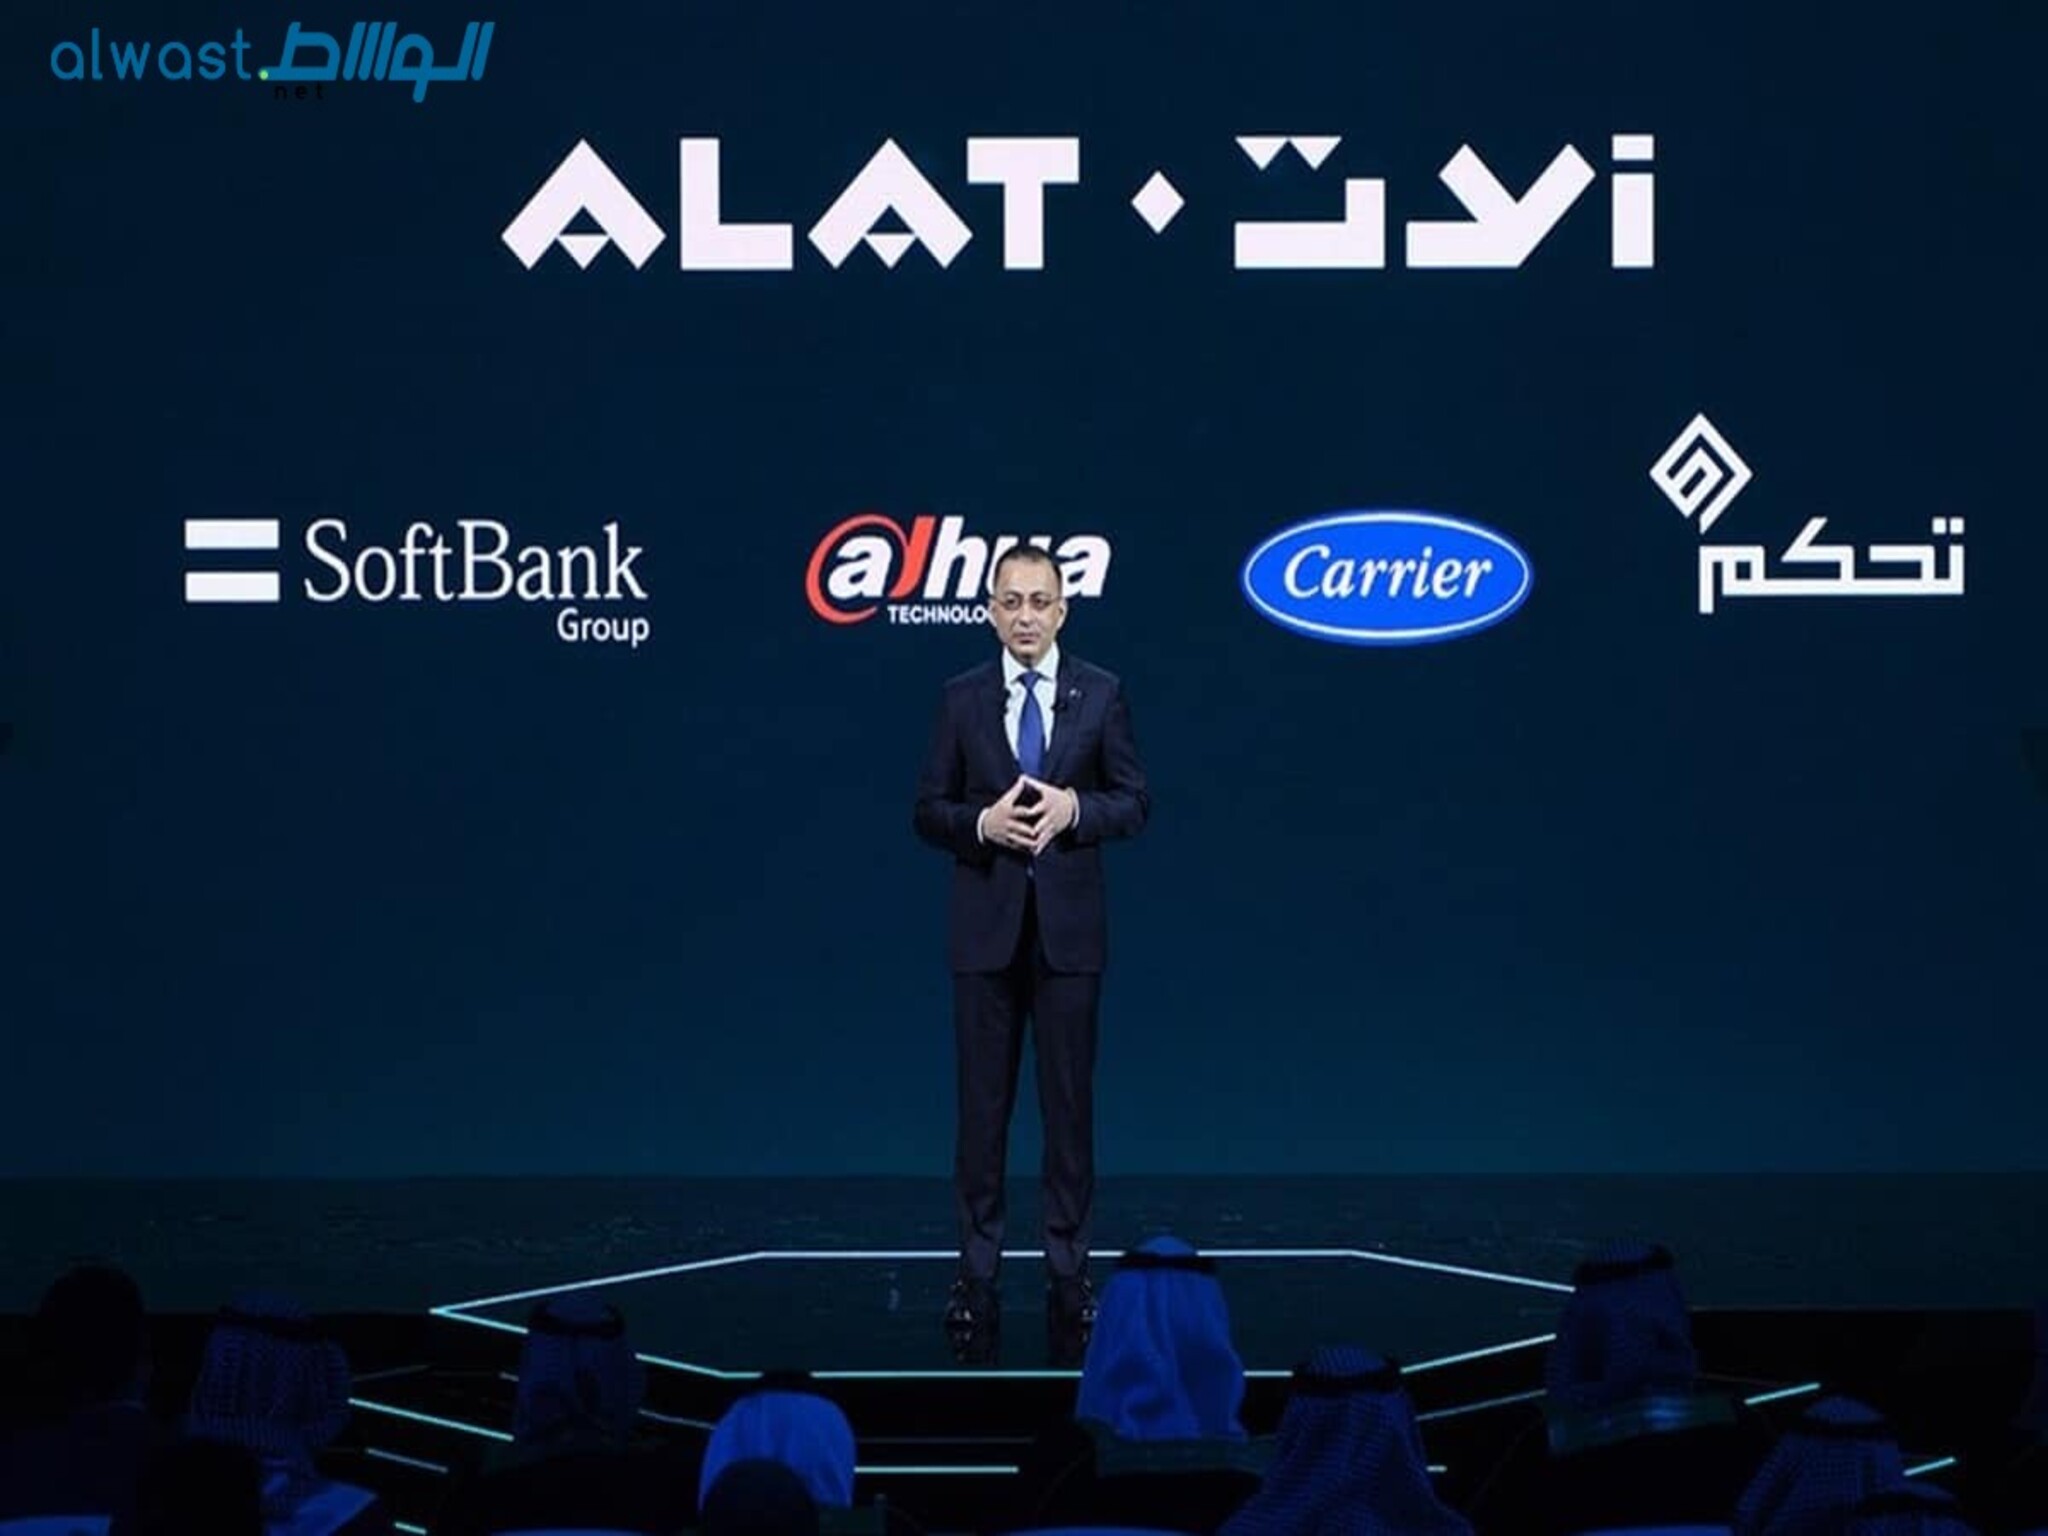 Alat plans $100bn investment in tech, announces 4 partners in Saudi Arabia